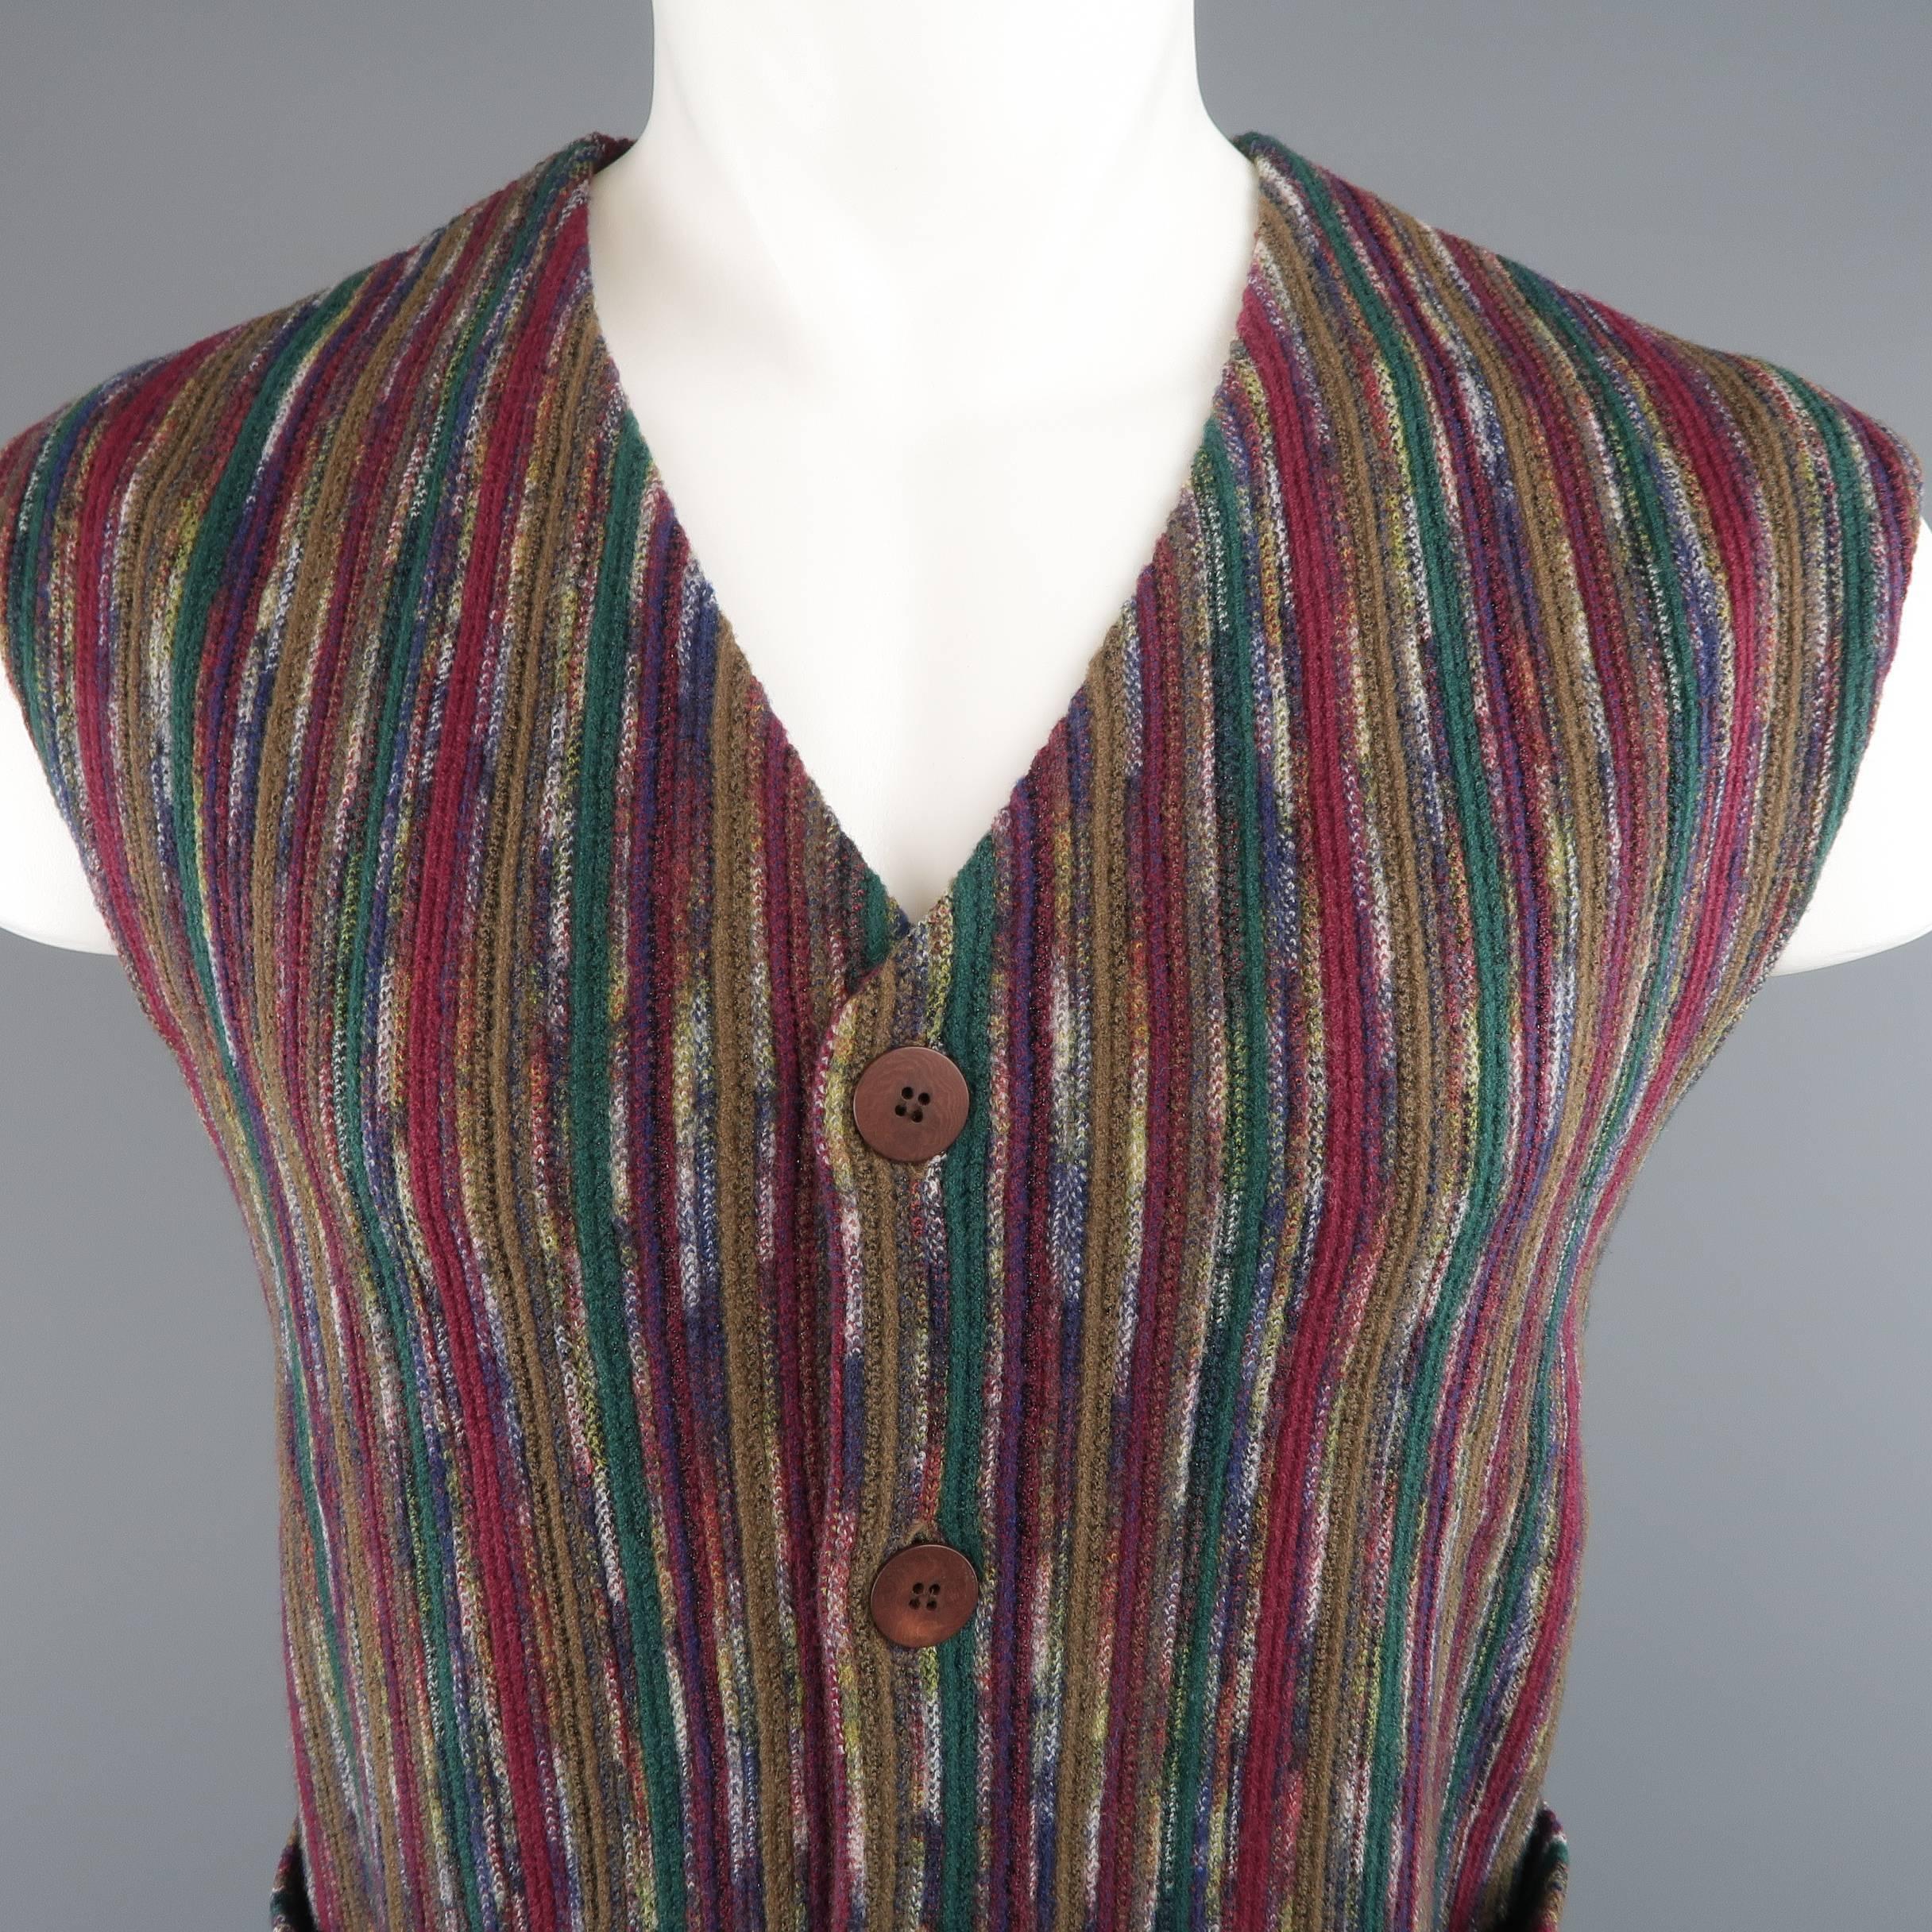 Vintage MISSONI vest comes in a multi color cranberry Earth tone stripe pattern wool blend knit with a V neck, slit pockets, and brown buttons. Missing bottom button. As-is. Made in Italy.
 
Good Pre-Owned Condition.
Marked: IT 52
 
Measurements:
